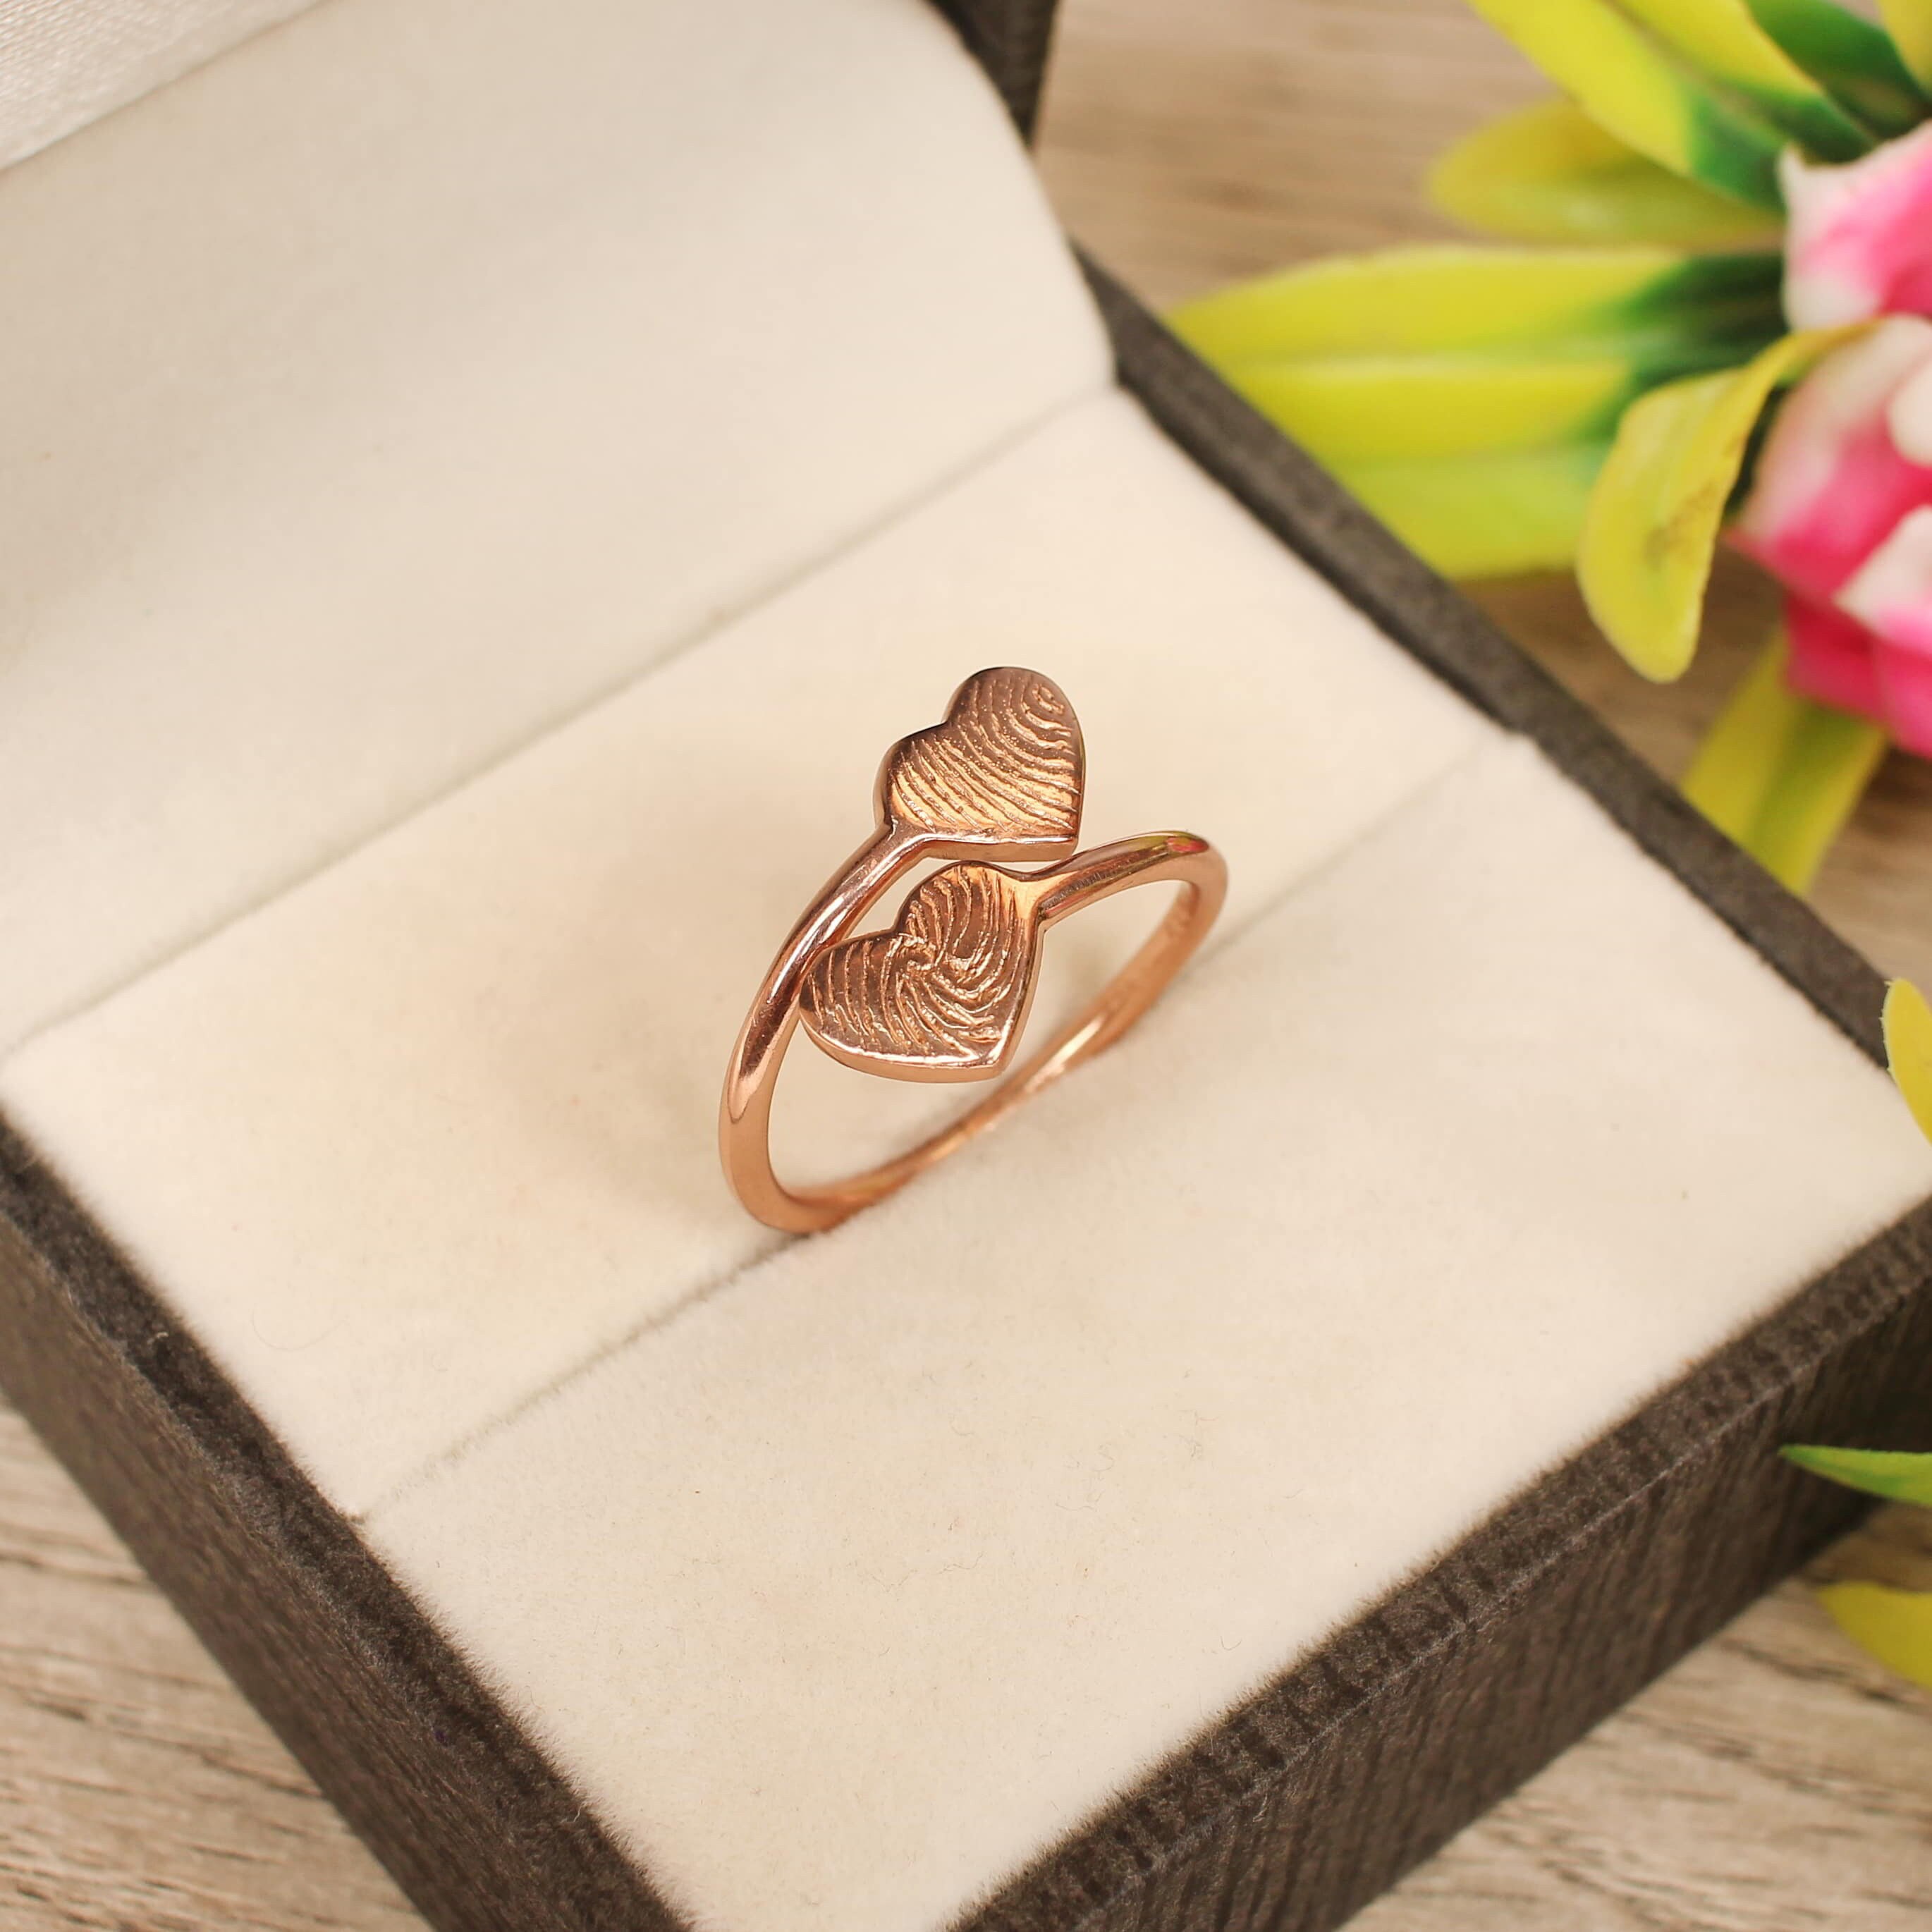 14K Yellow Gold Children's Heart Ring (Size 5) Made In United States r202 -  Walmart.com